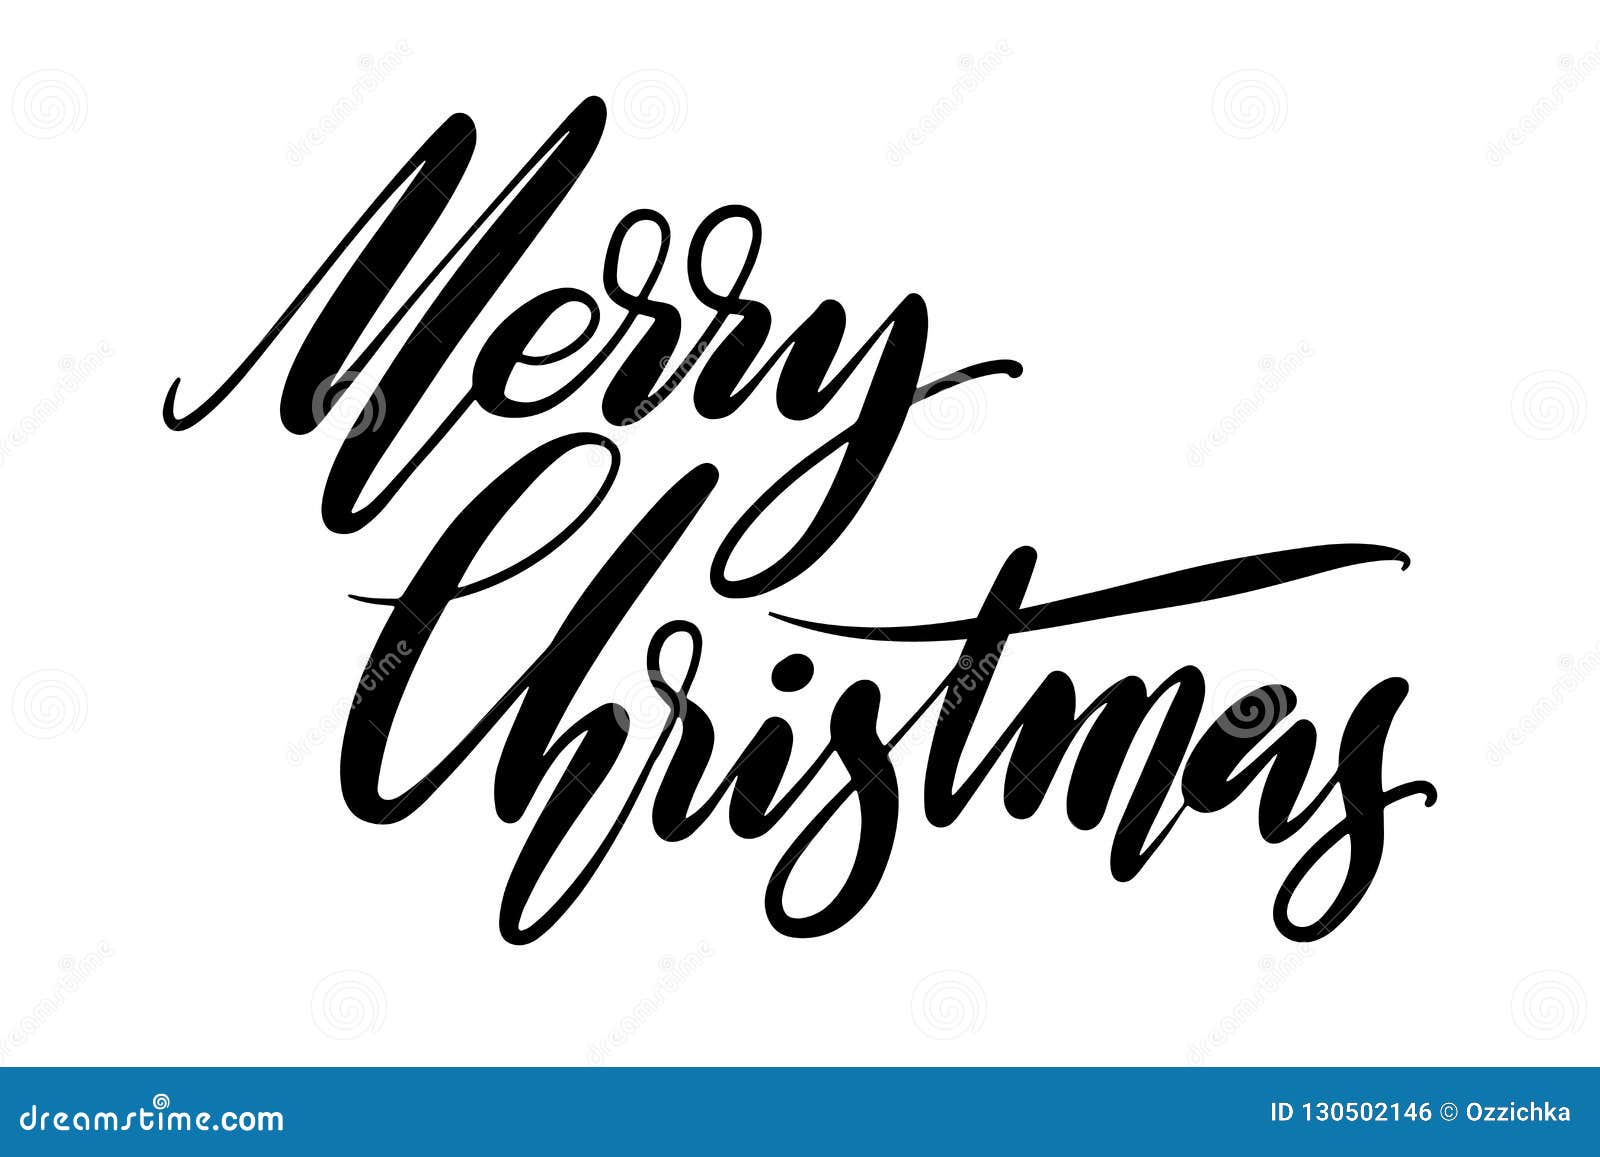 Merry Christmas Phrase Isolated on White Background. Hand Drawn ...